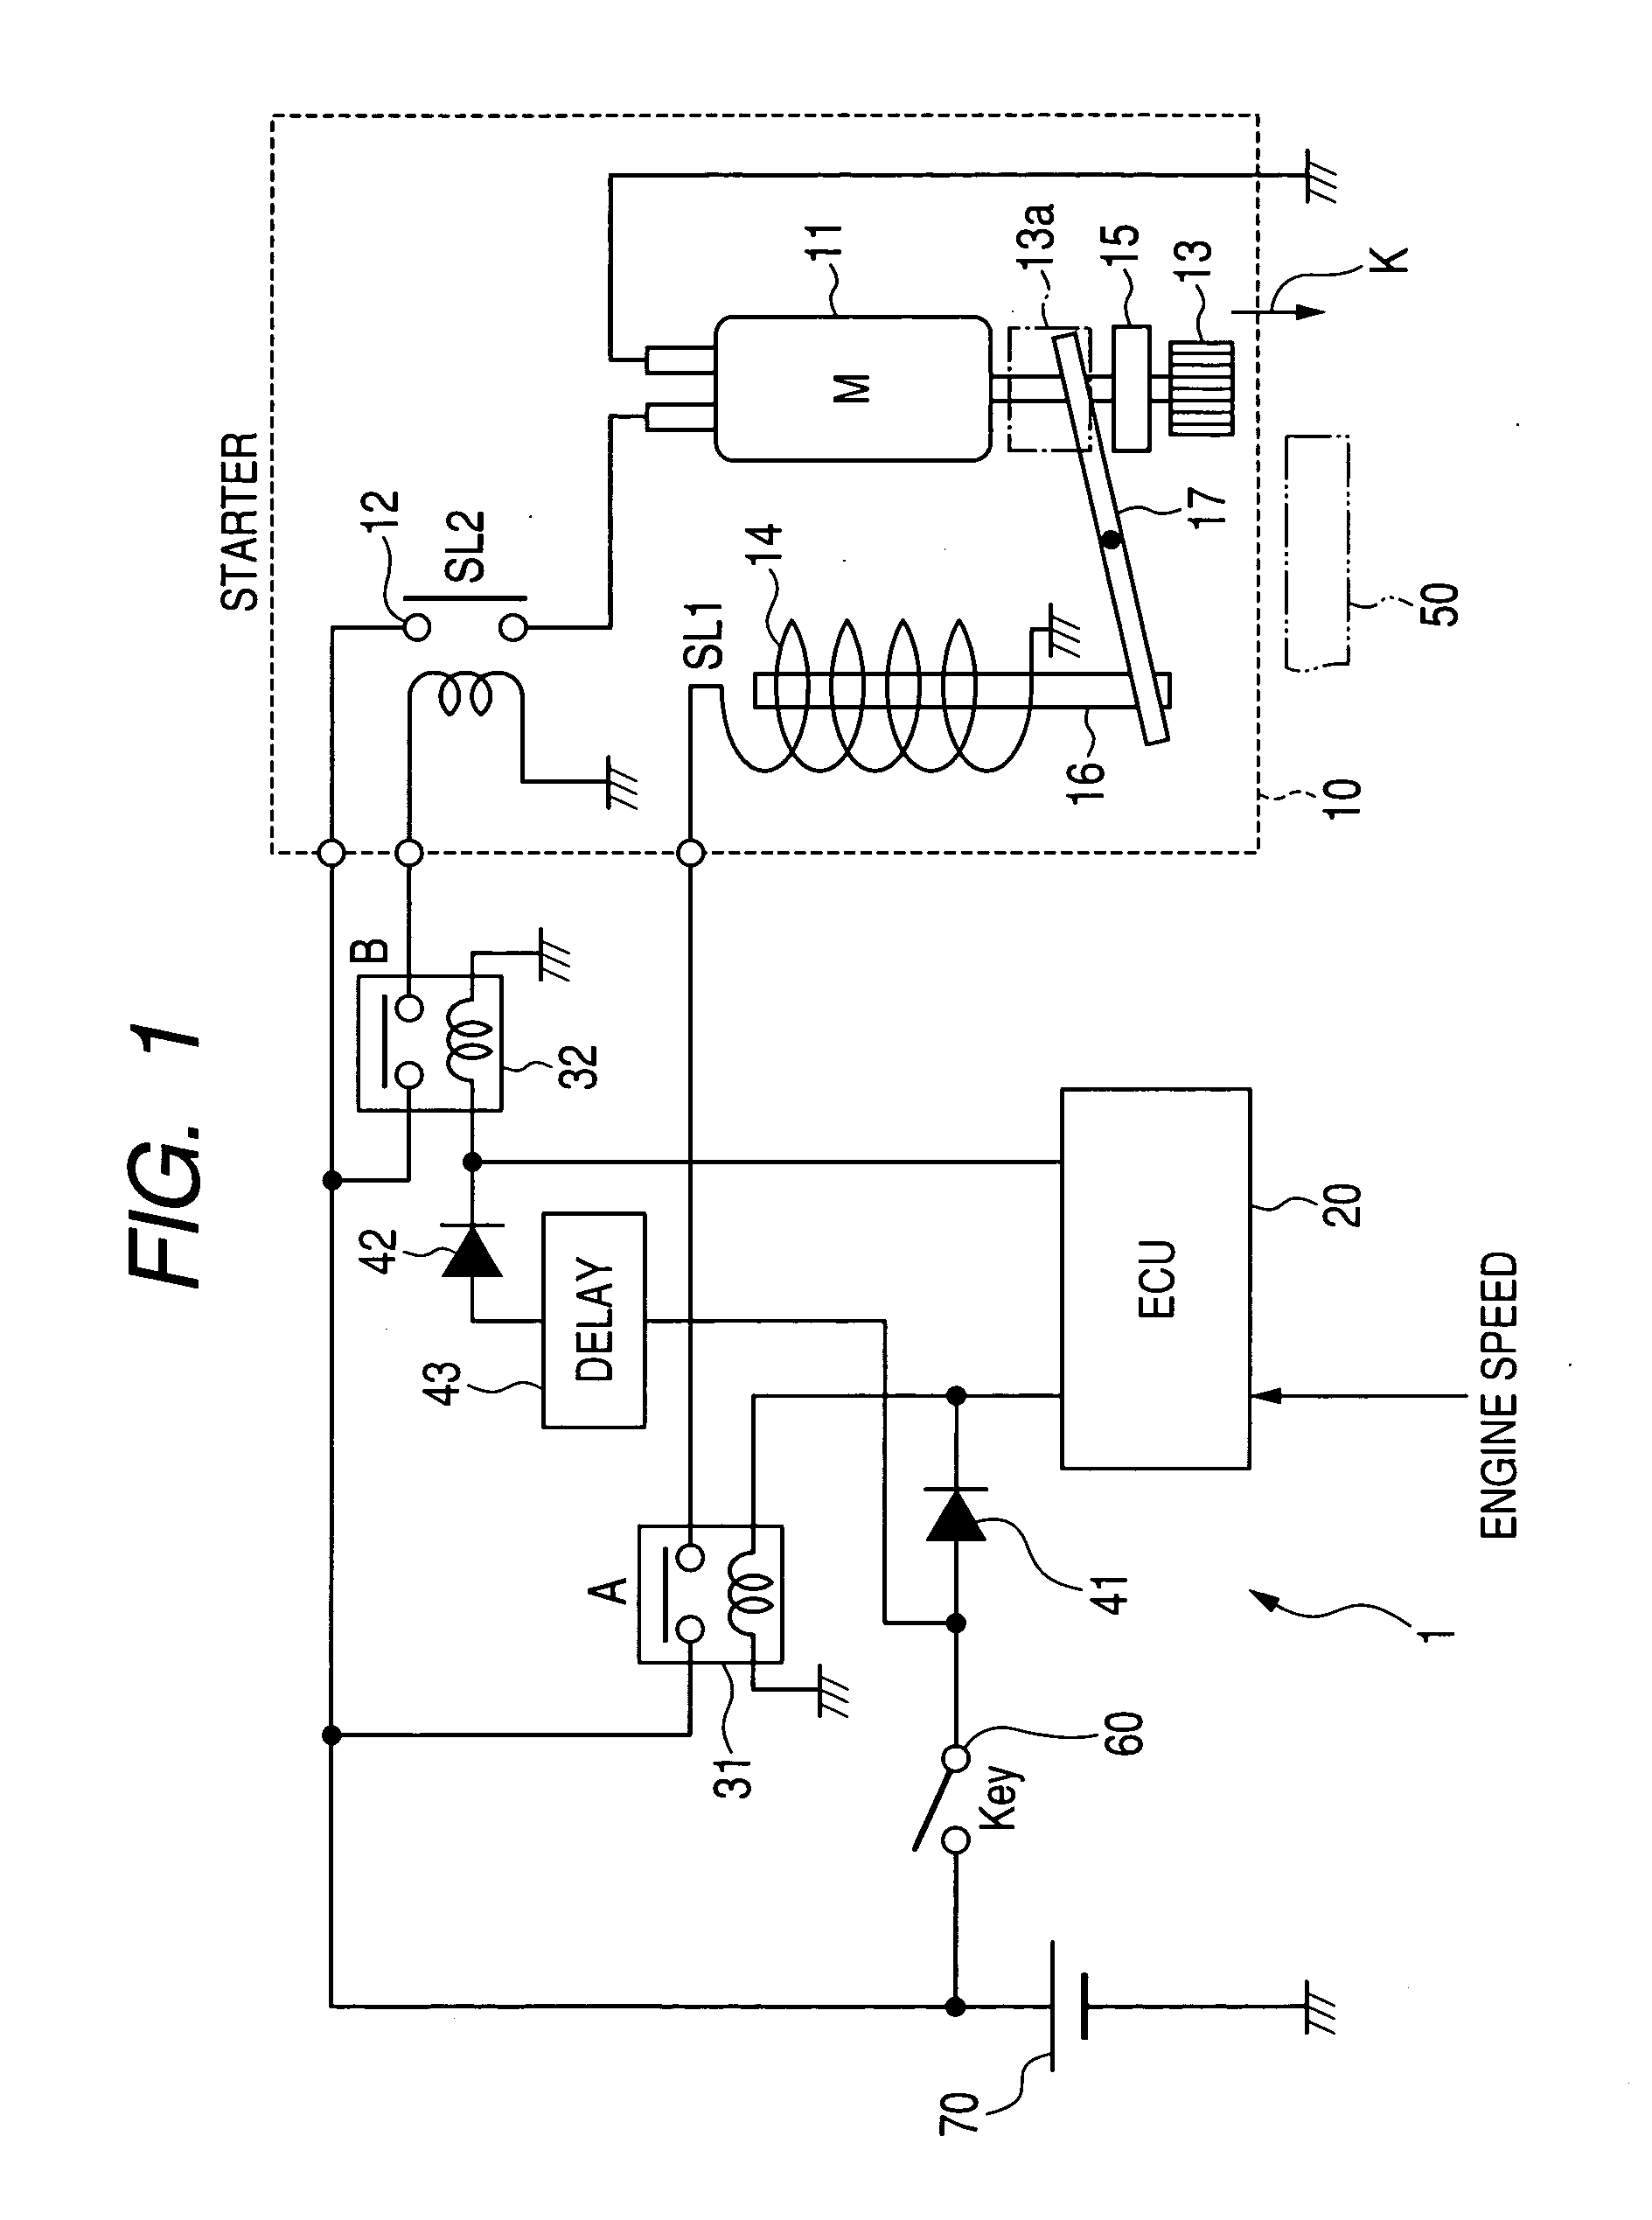 Engine start system for use in idle stop system for automotive vehicle